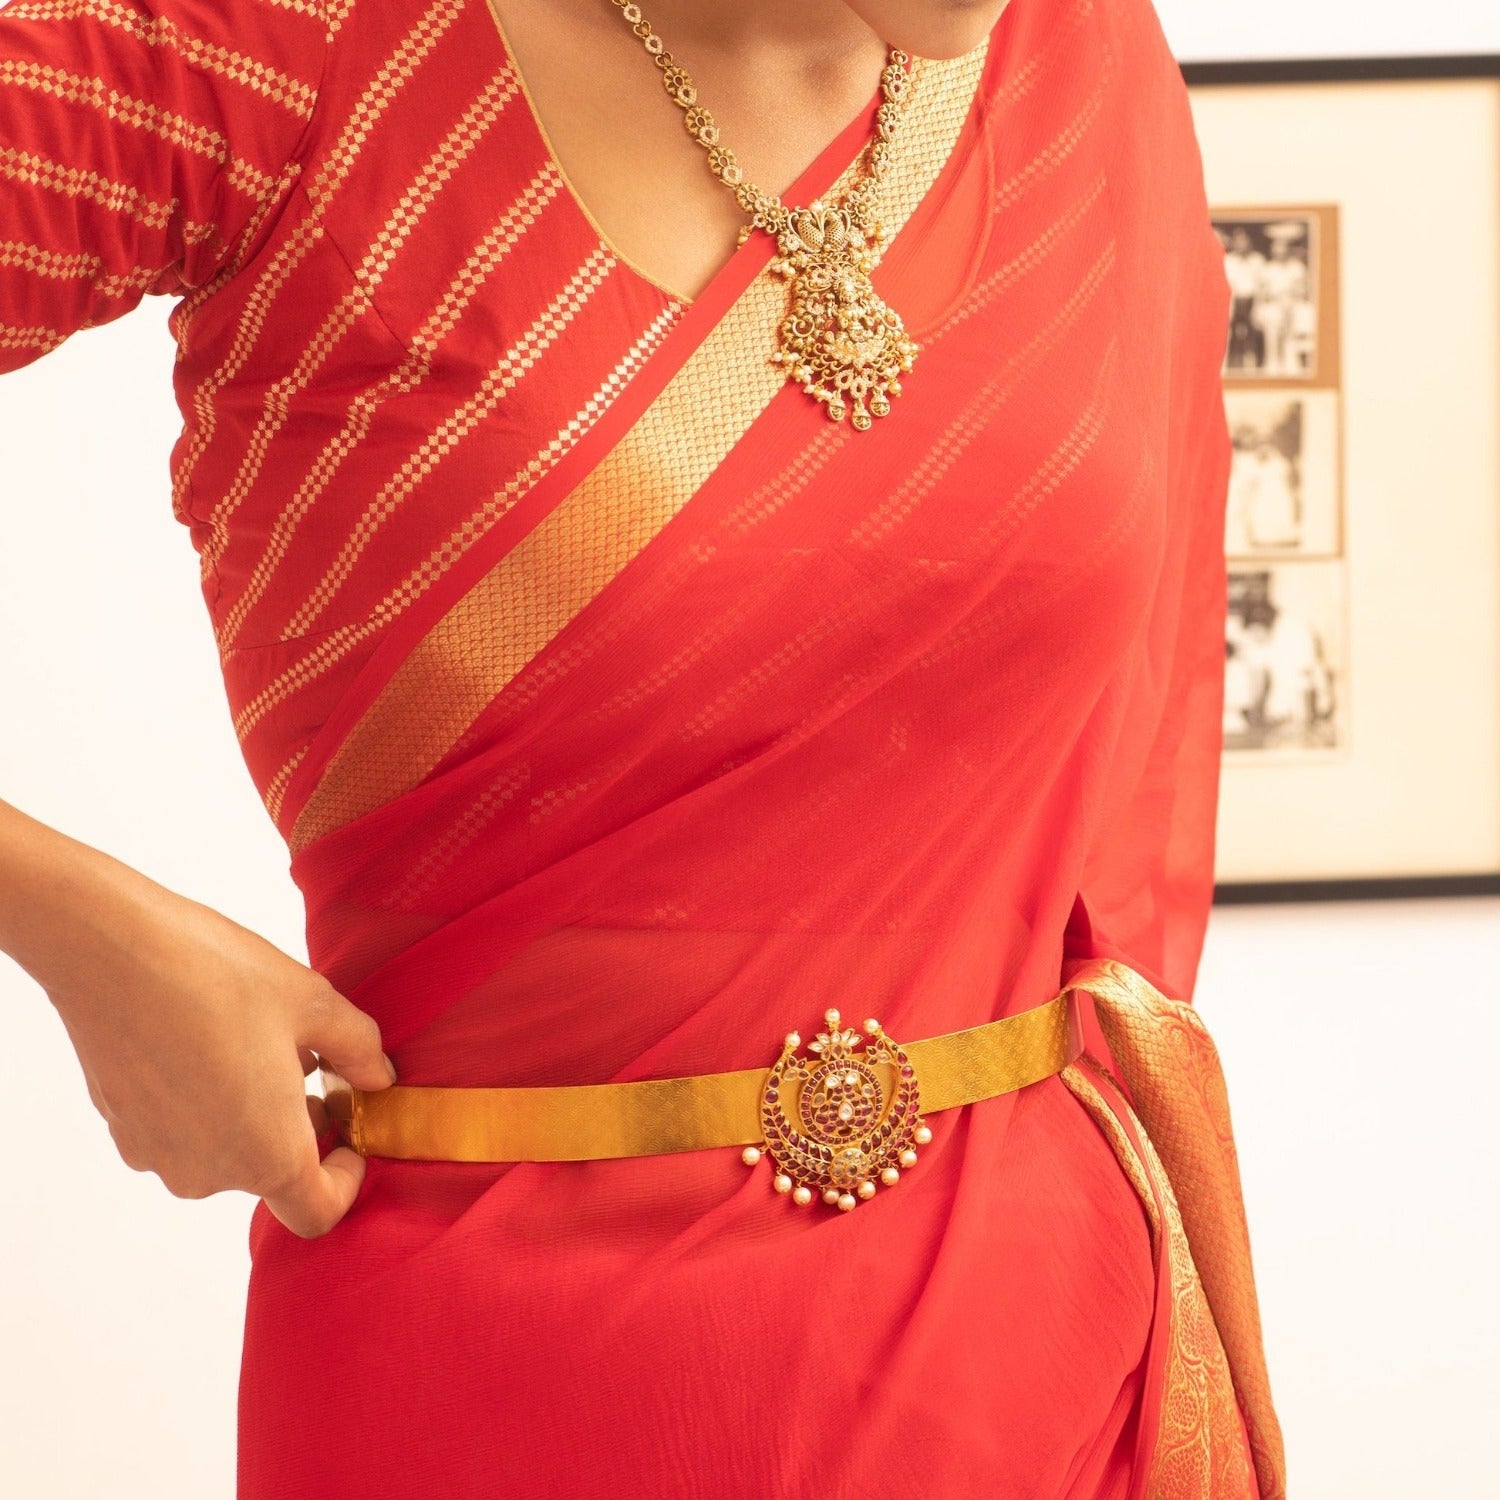 Buy Hip Belt For Saree Now  Make Your Appearance Grand